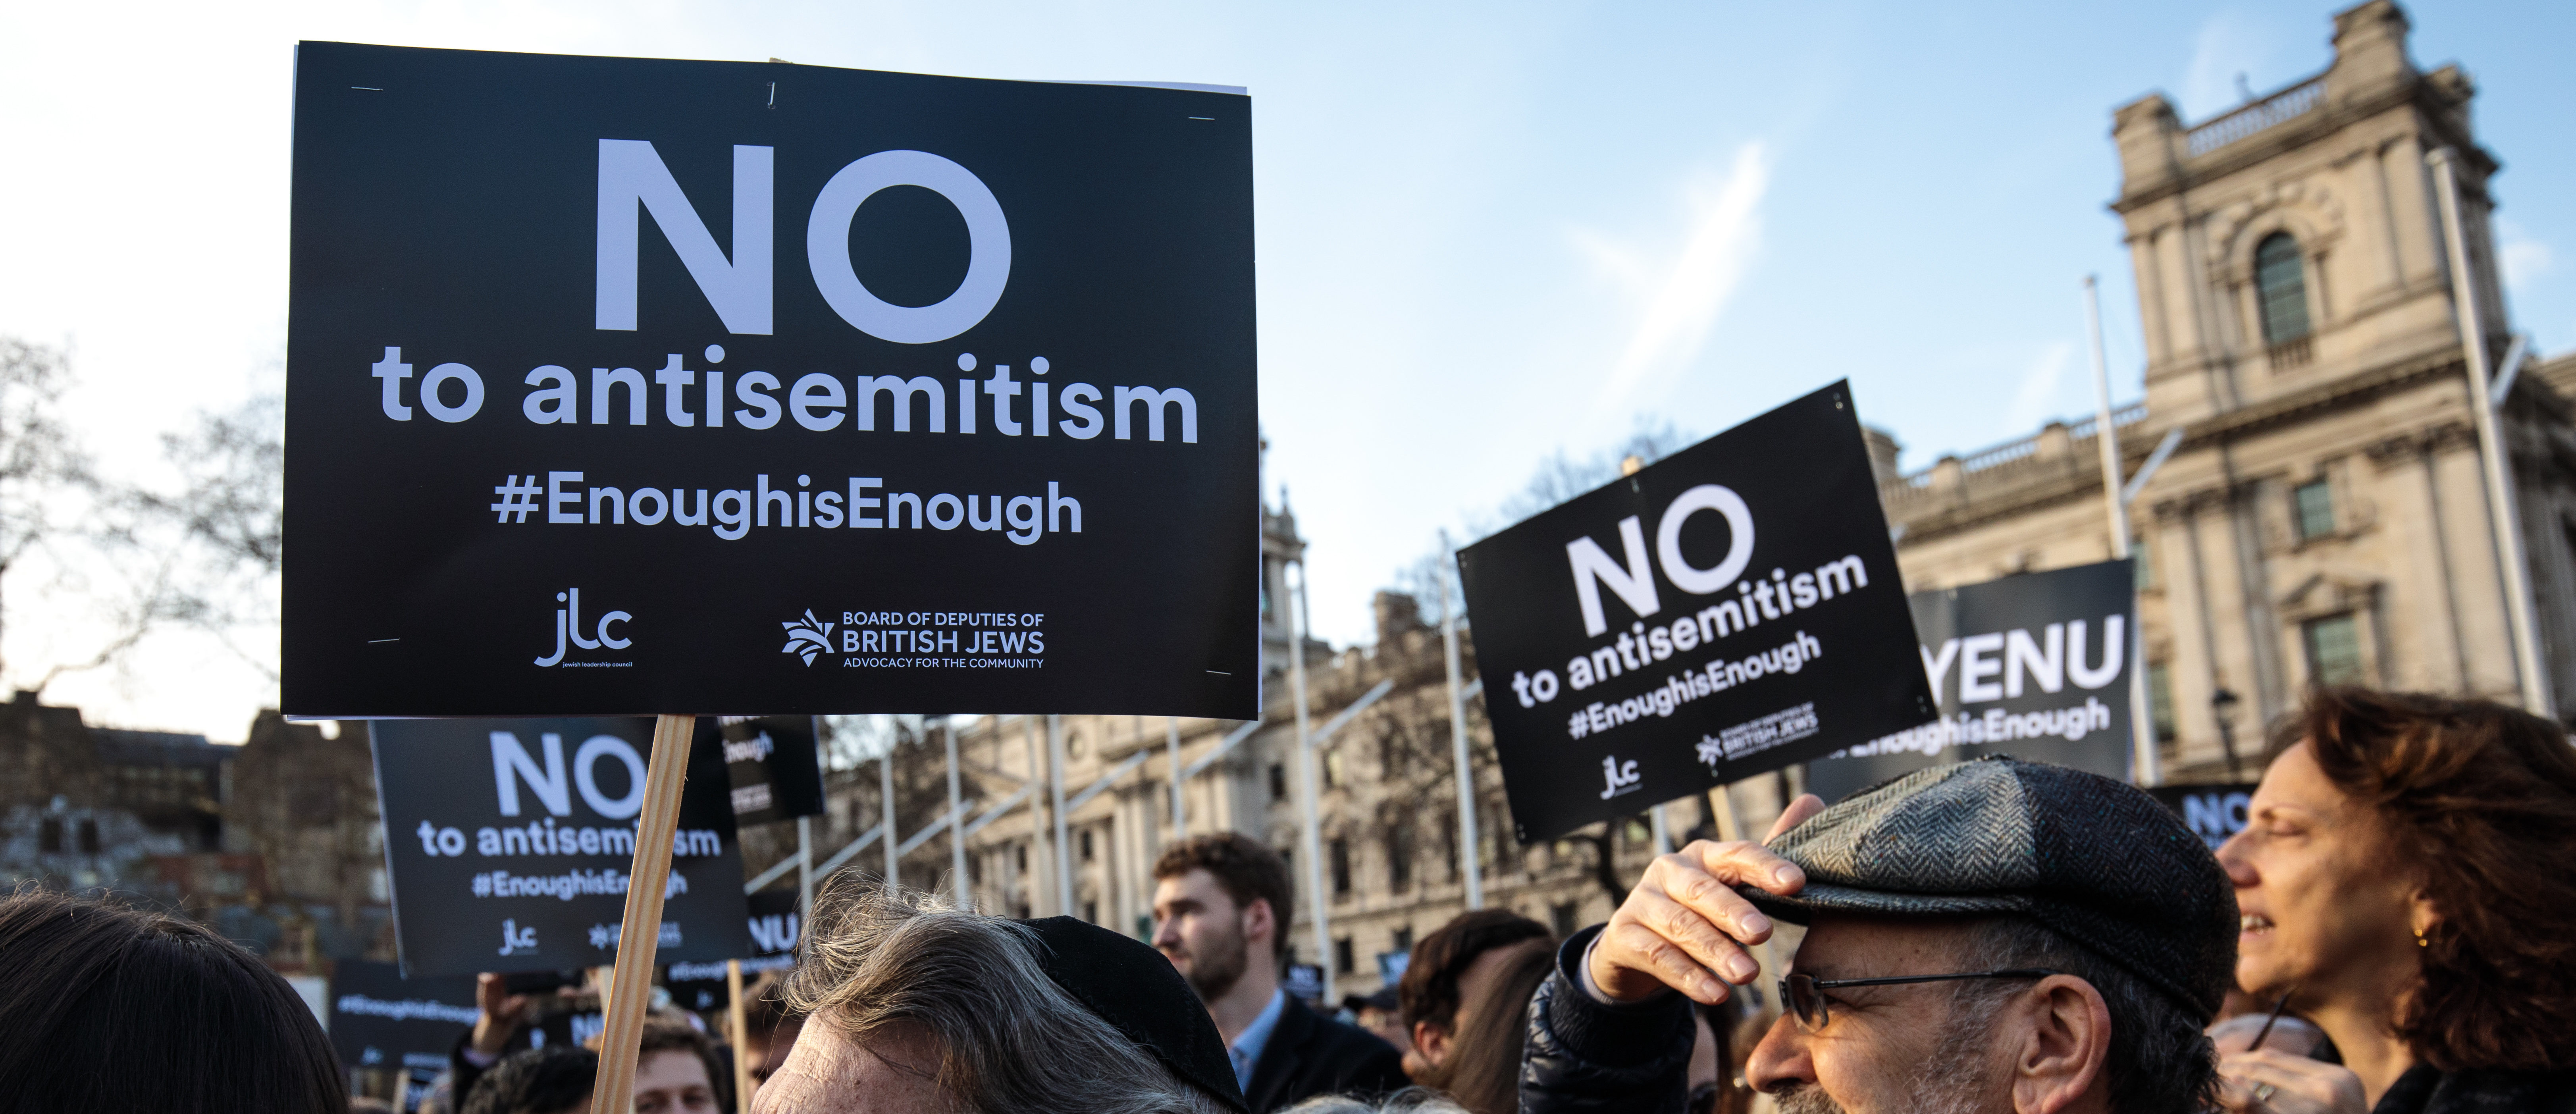 LONDON, ENGLAND - MARCH 26: Protesters hold placards as they demonstrate in Parliament Square against anti-Semitism on March 26, 2018 in London, England. The Board of Deputies of British Jews and the Jewish Leadership Council have drawn up a letter accusing Labour Leader Jeremy Corbyn of failing to address anti-Semitism in his party. Mr Corbyn has today apologised to Jewish groups for "pockets of anti-Semitism" in Labour. (Photo by Jack Taylor/Getty Images)